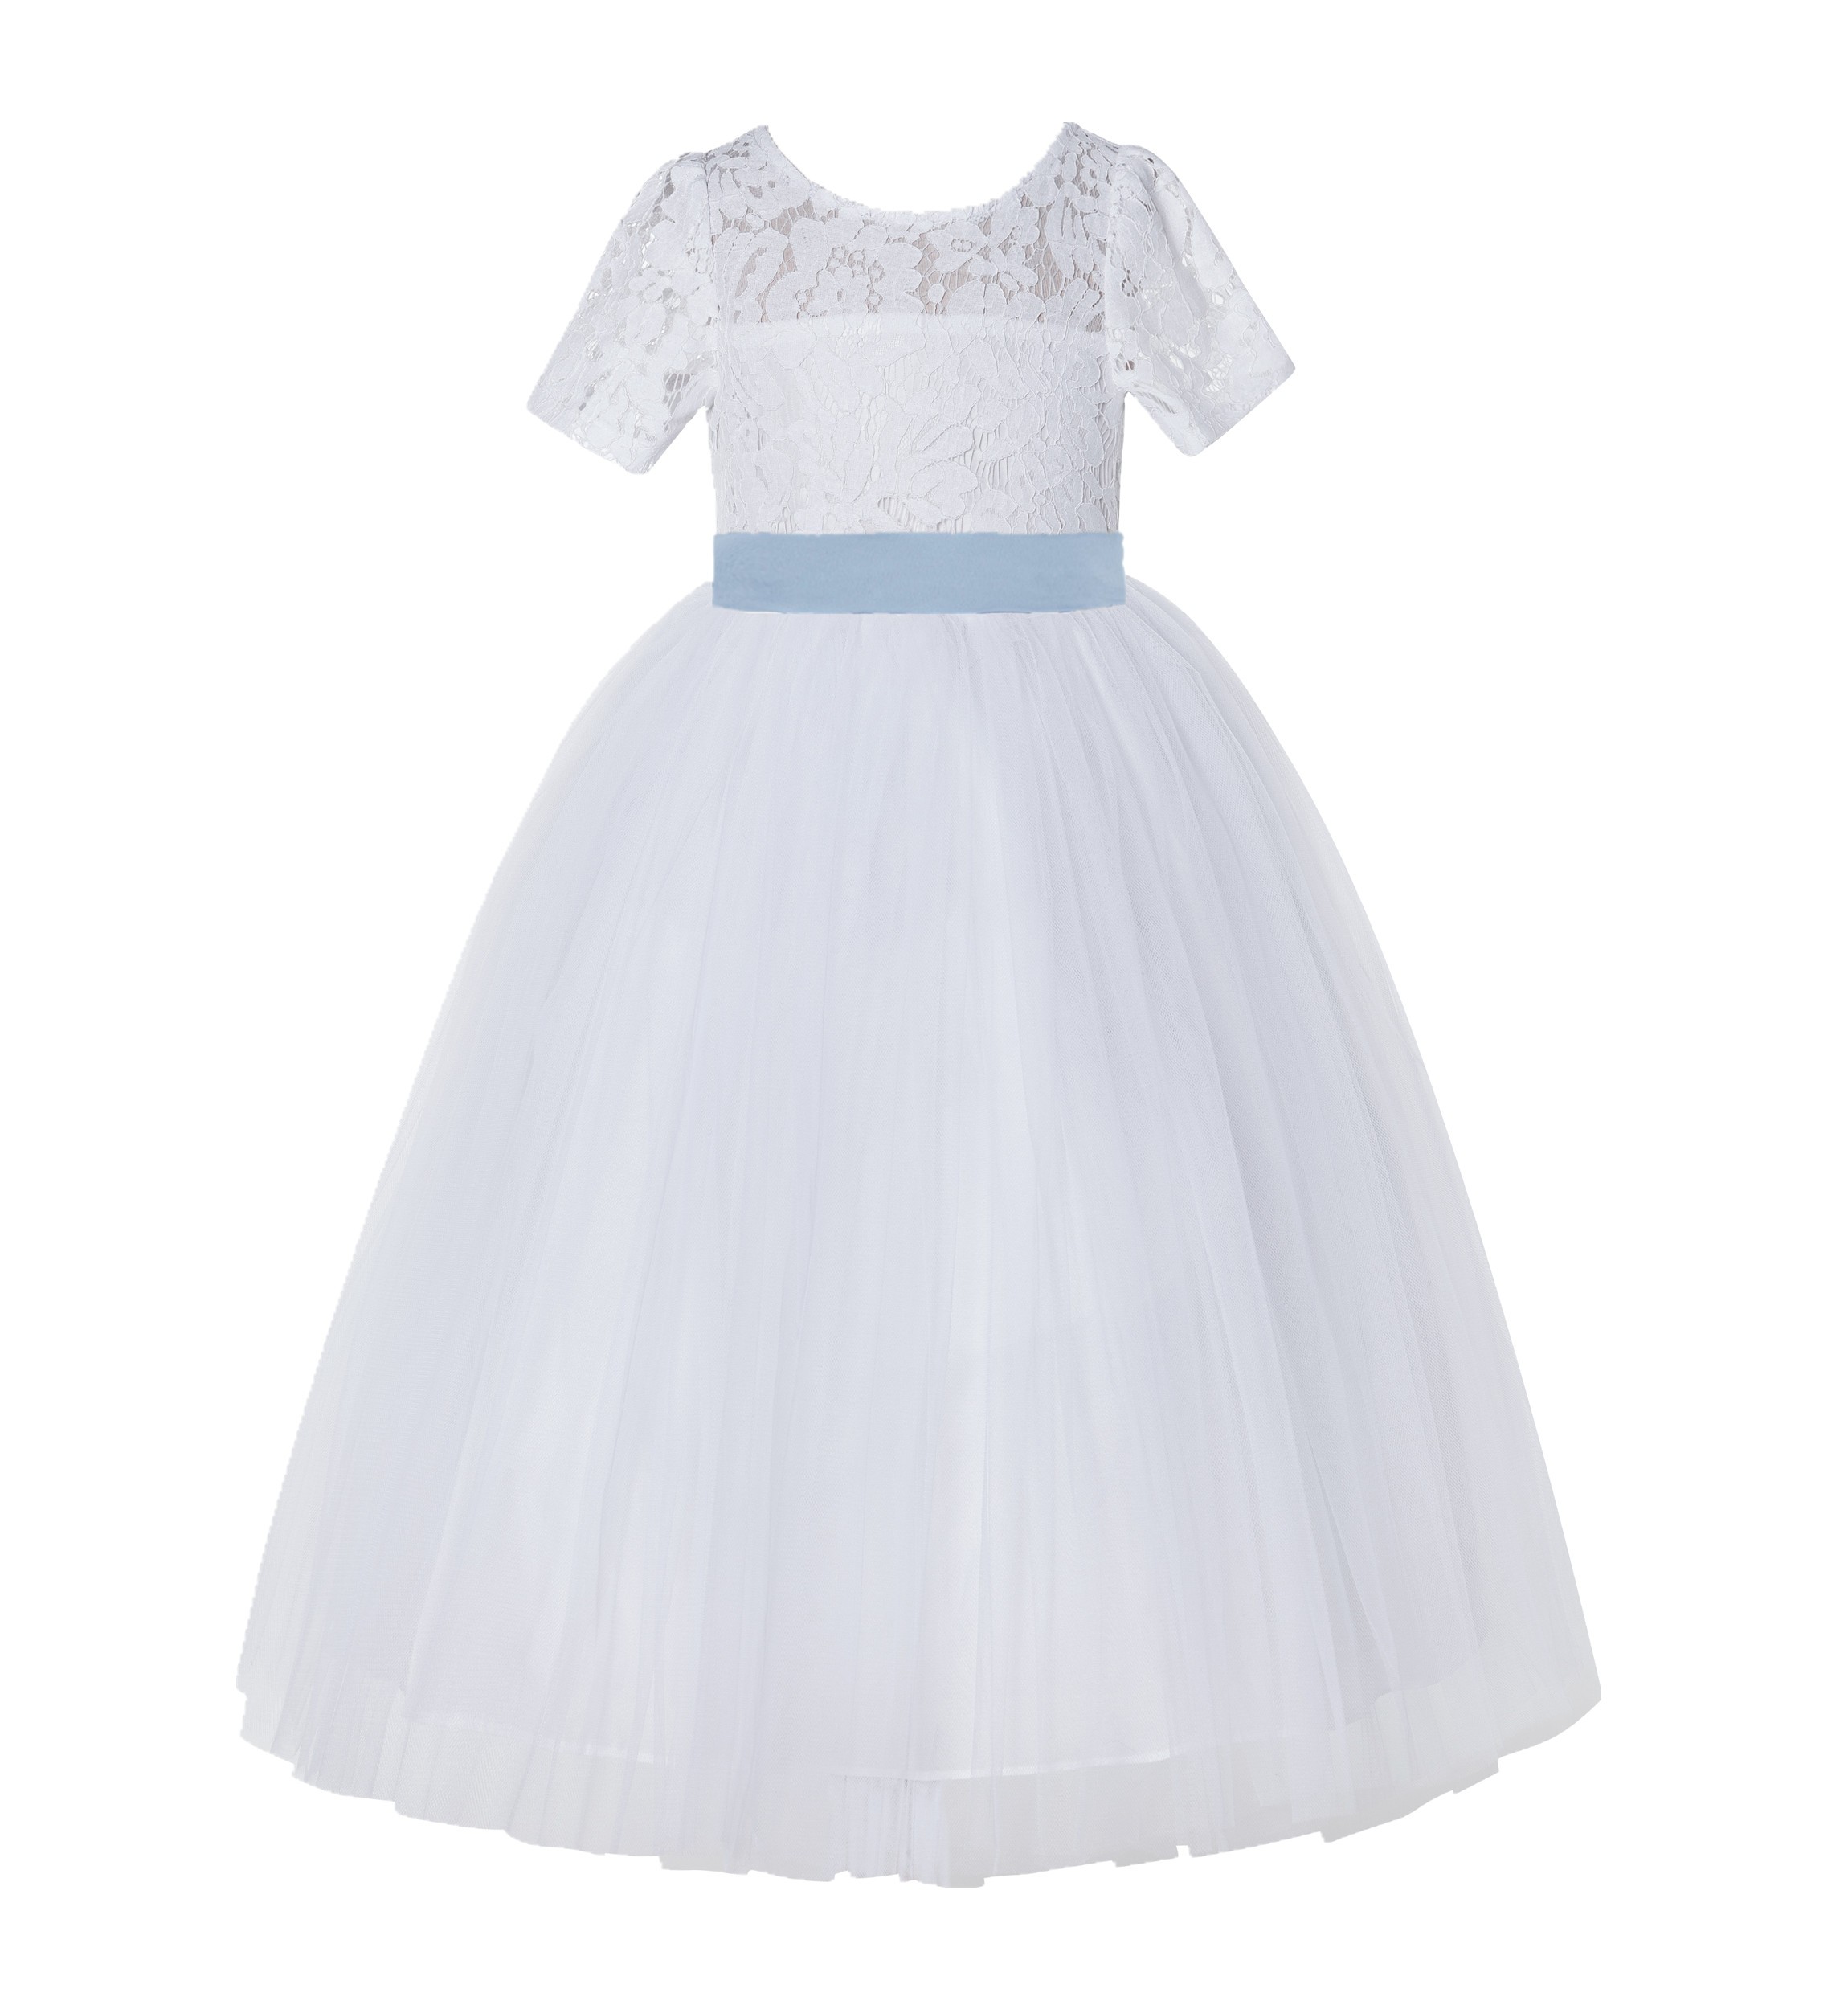 White / Dusty Blue Floral Lace Flower Girl Dress with Sleeves LG2